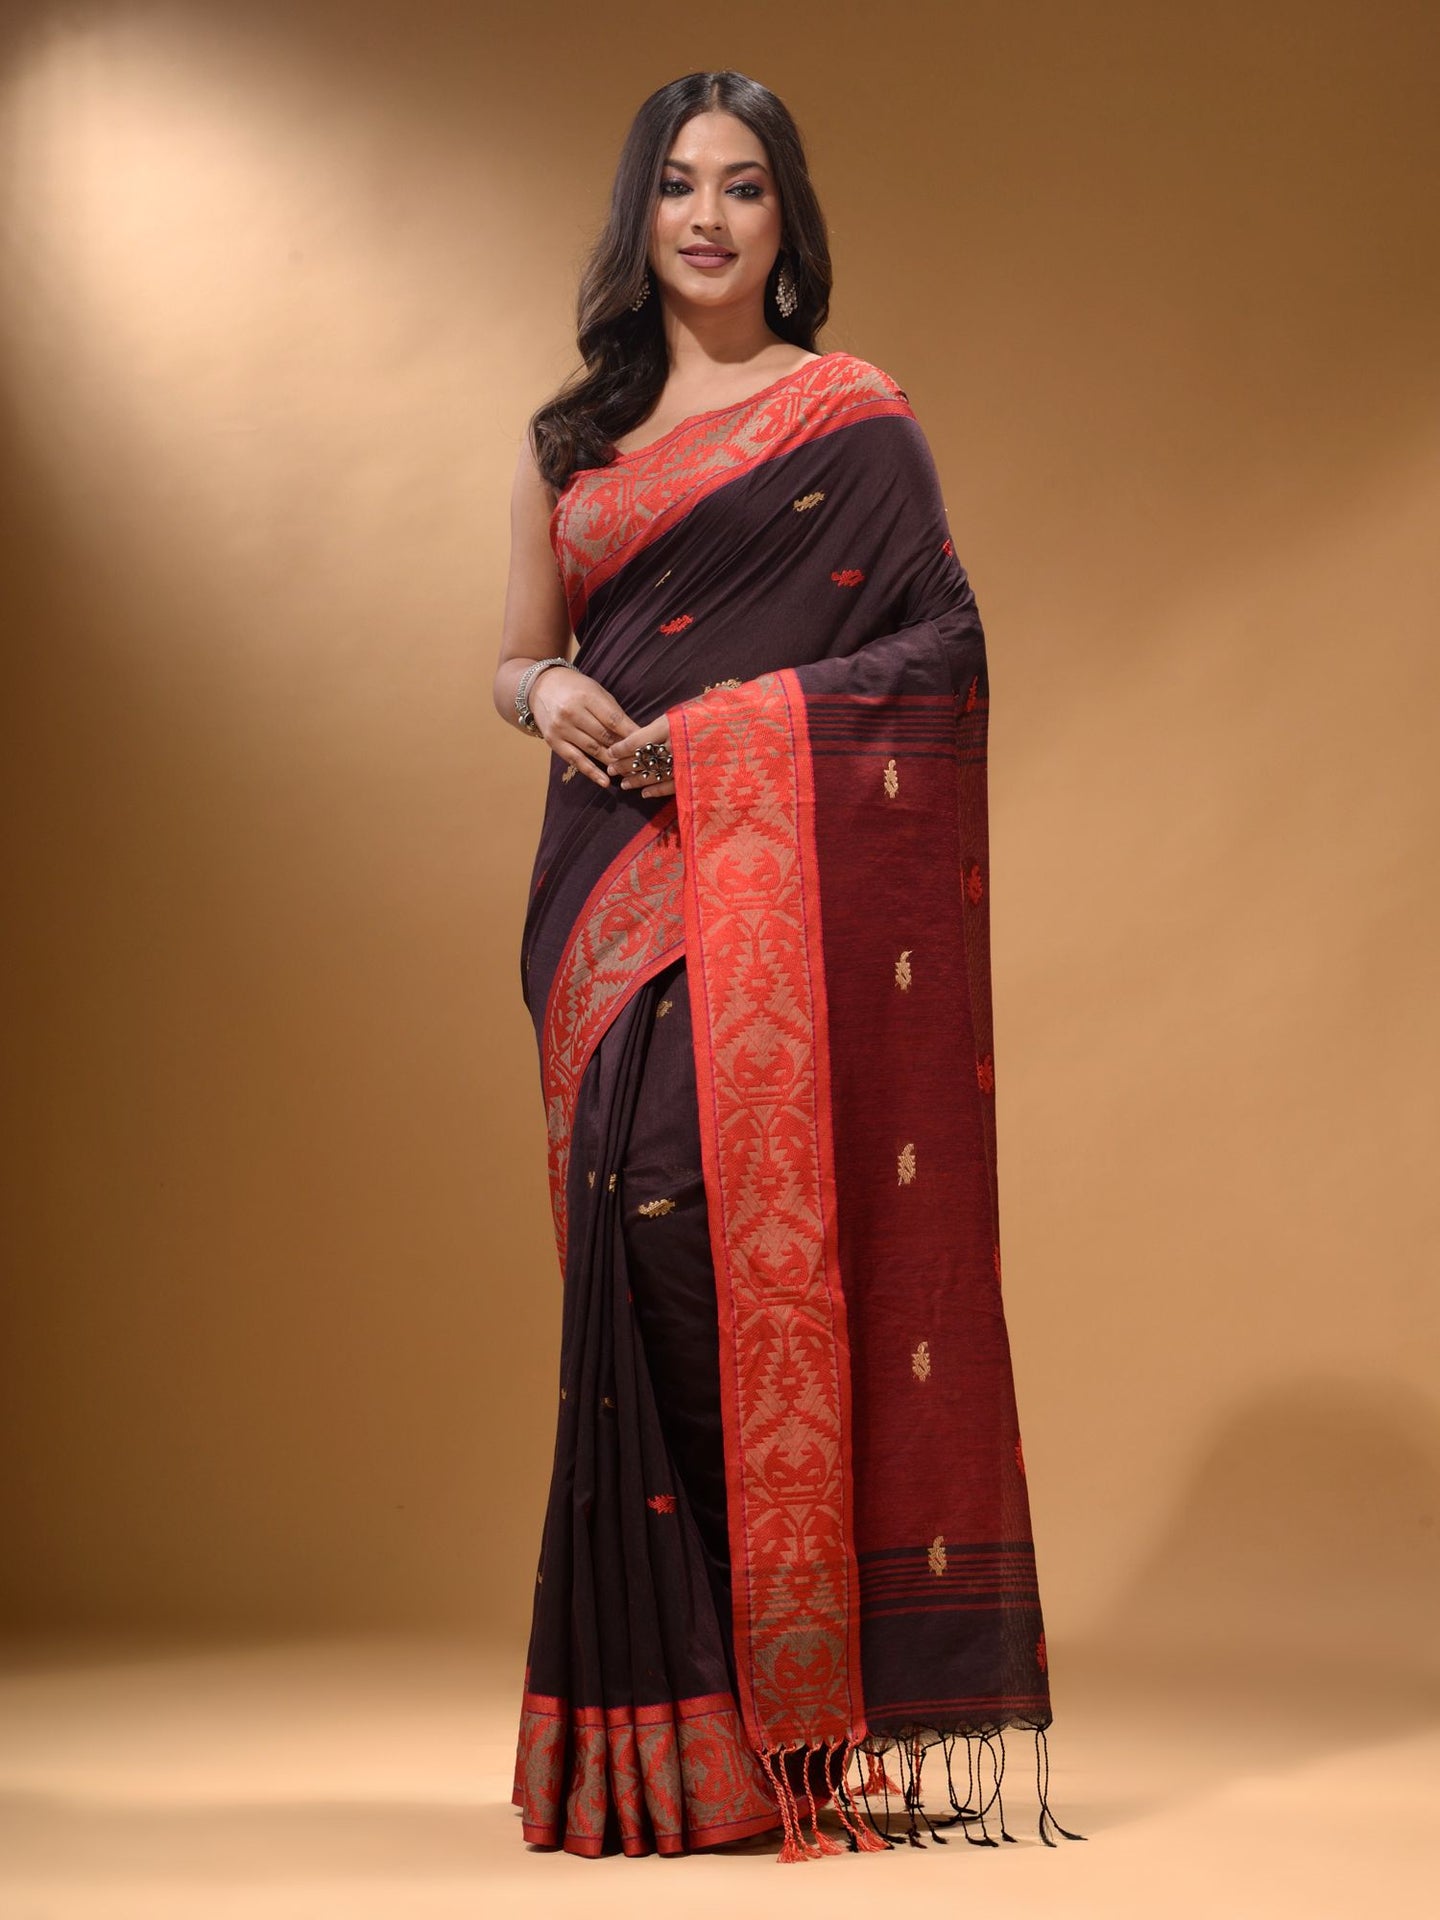 Brown Cotton Handspun Soft Saree With Nakshi Border And Contrast With Red Pallu